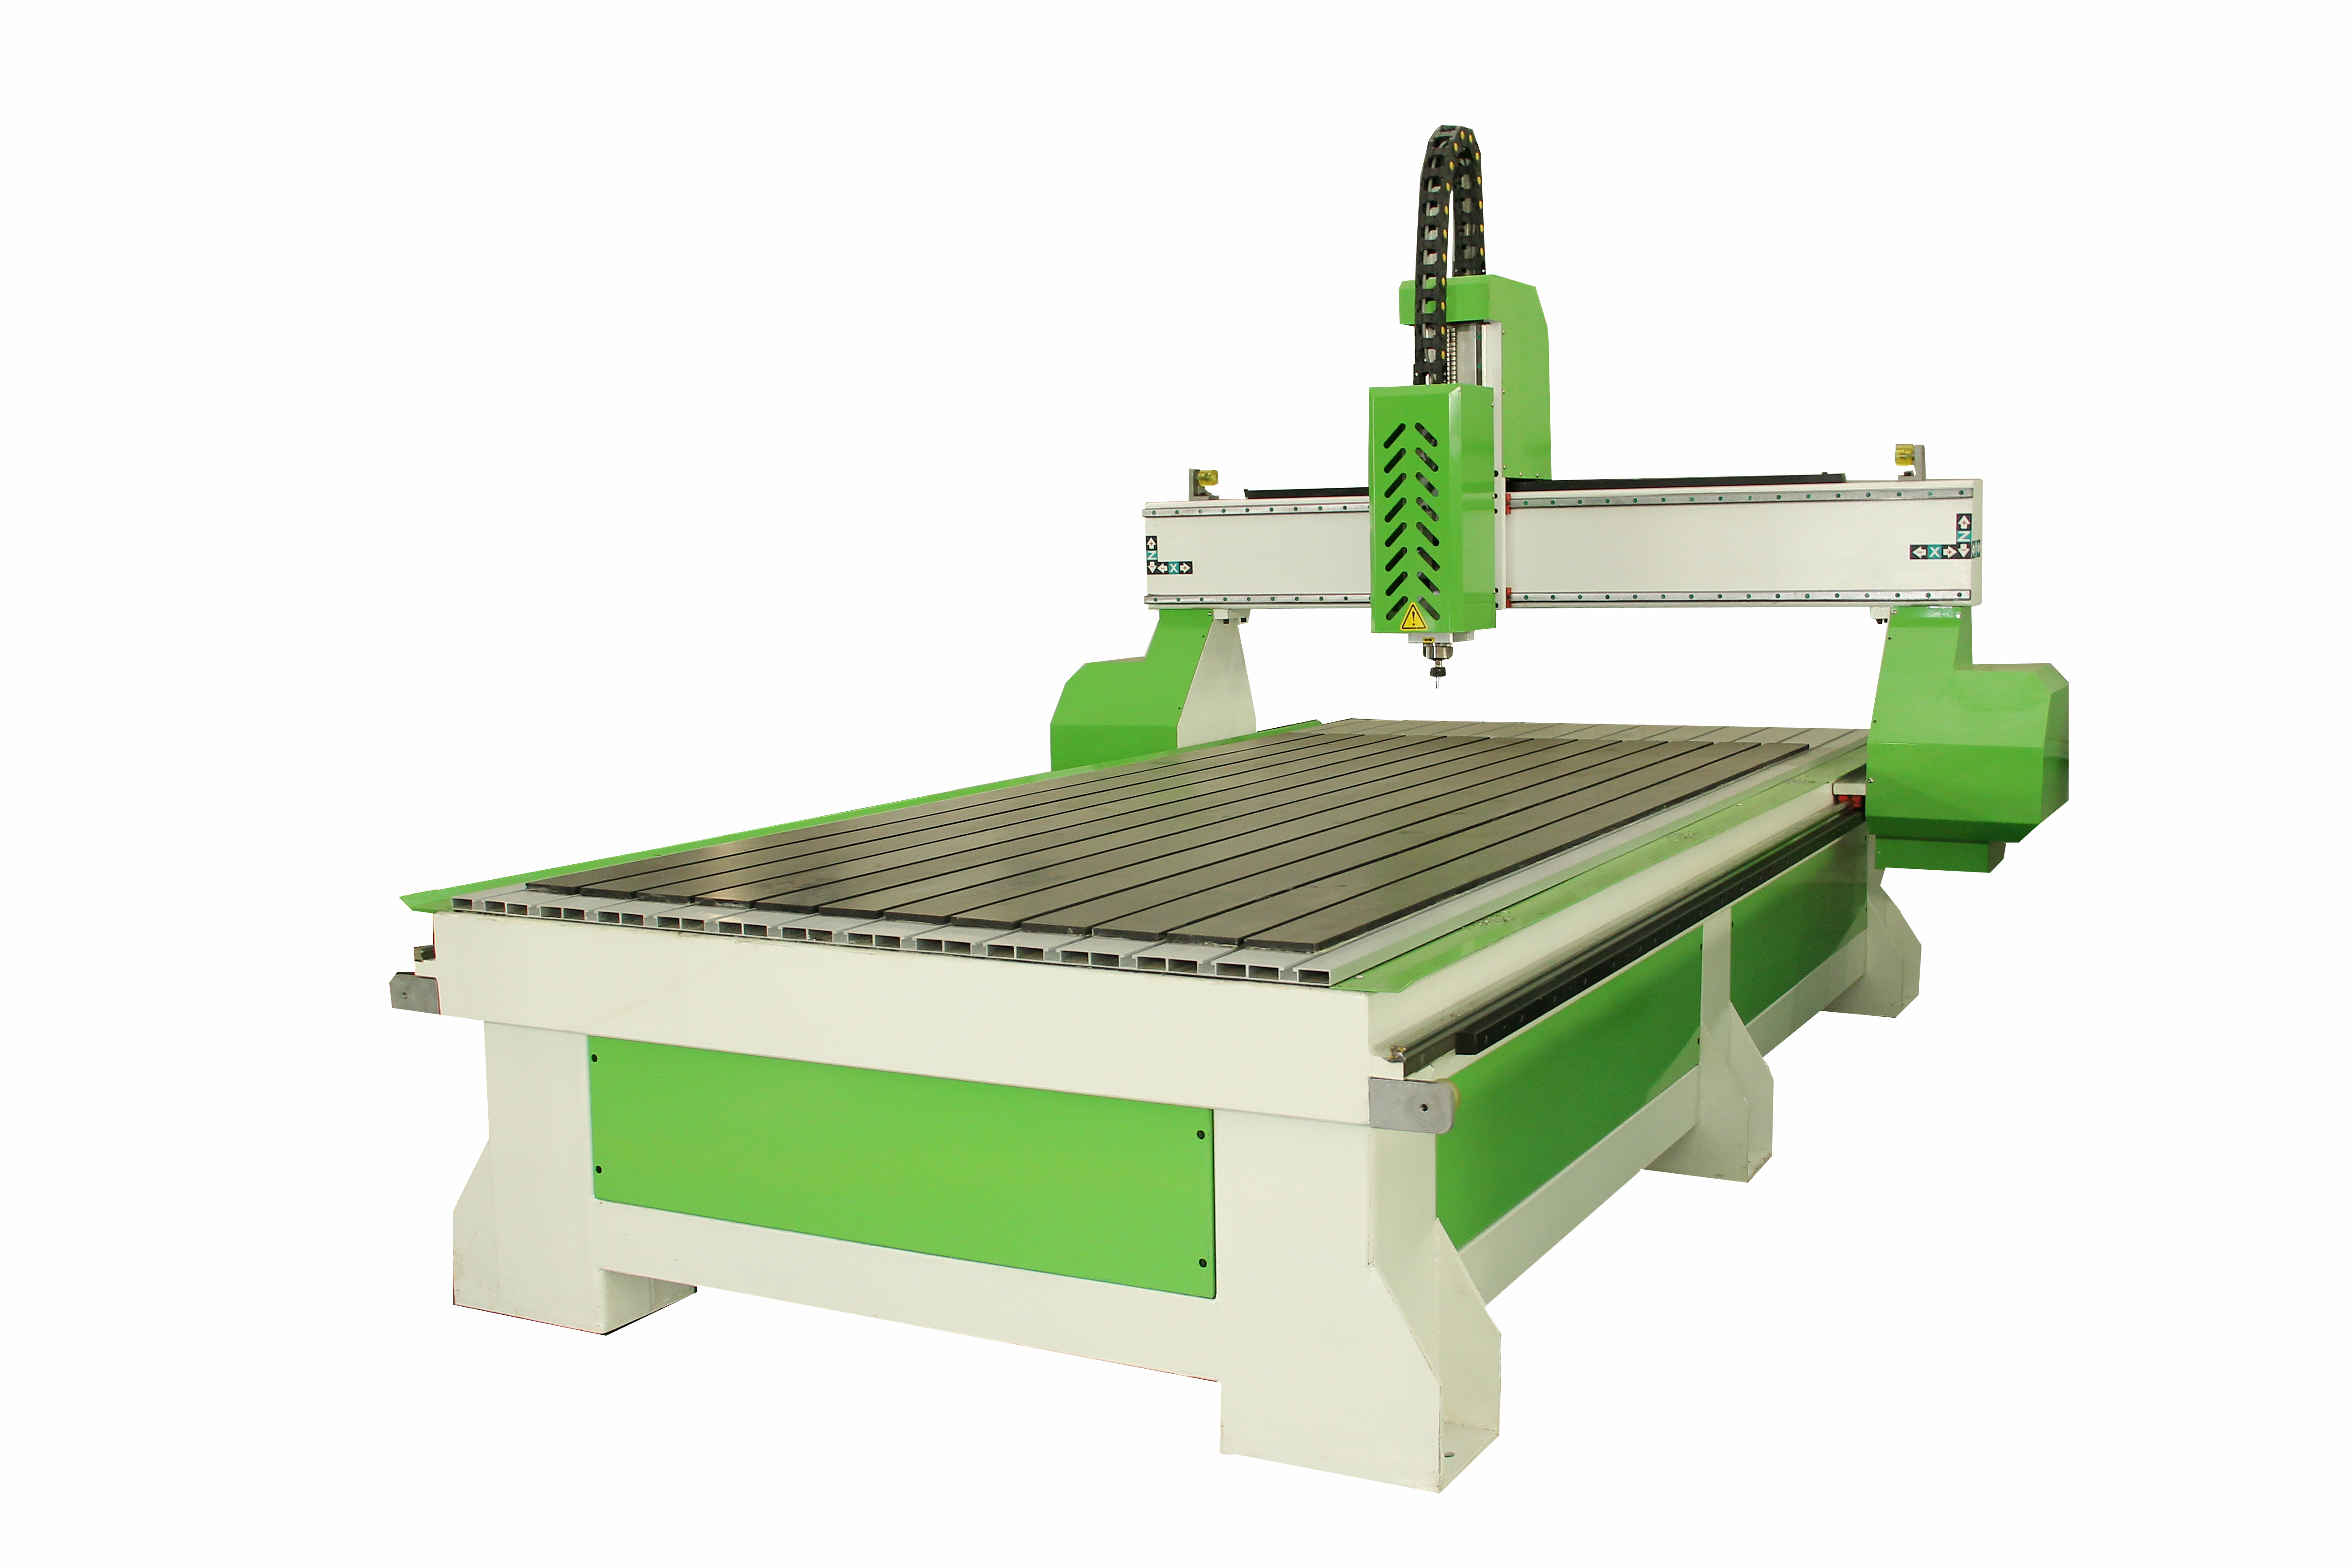 What is a CNC router machine?